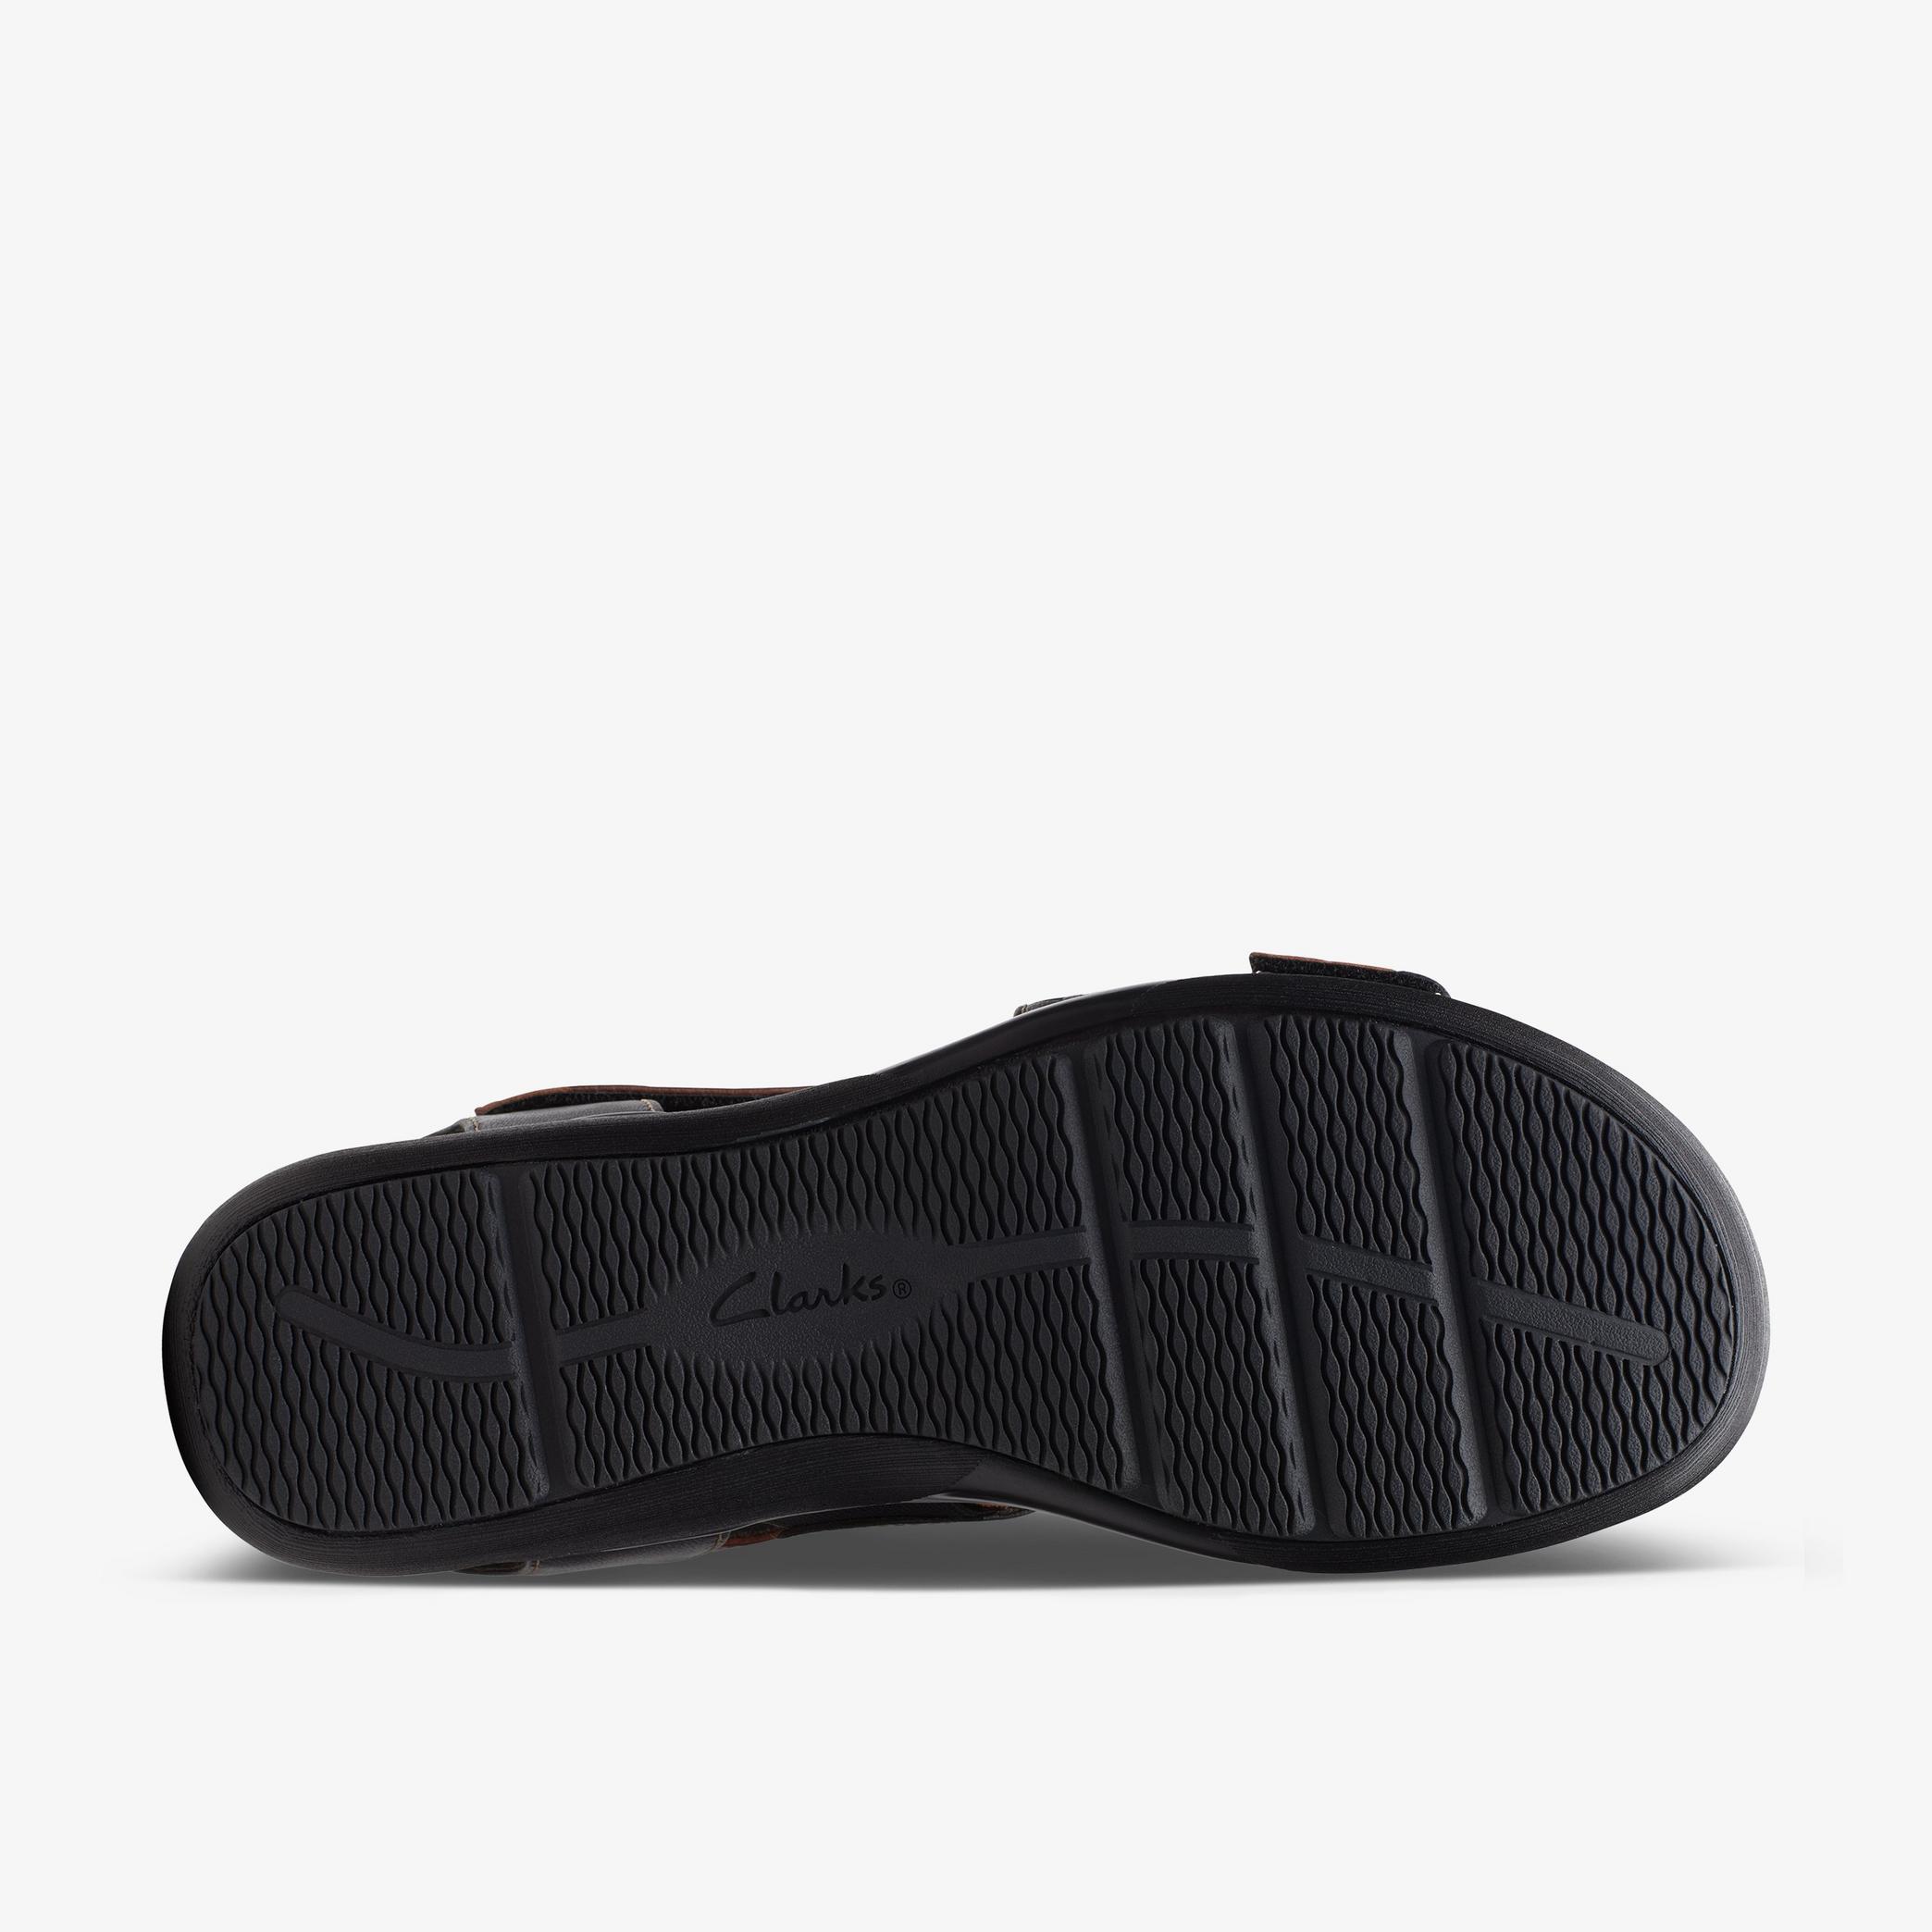 Kitly Way Black Leather Flat Sandals, view 3 of 6